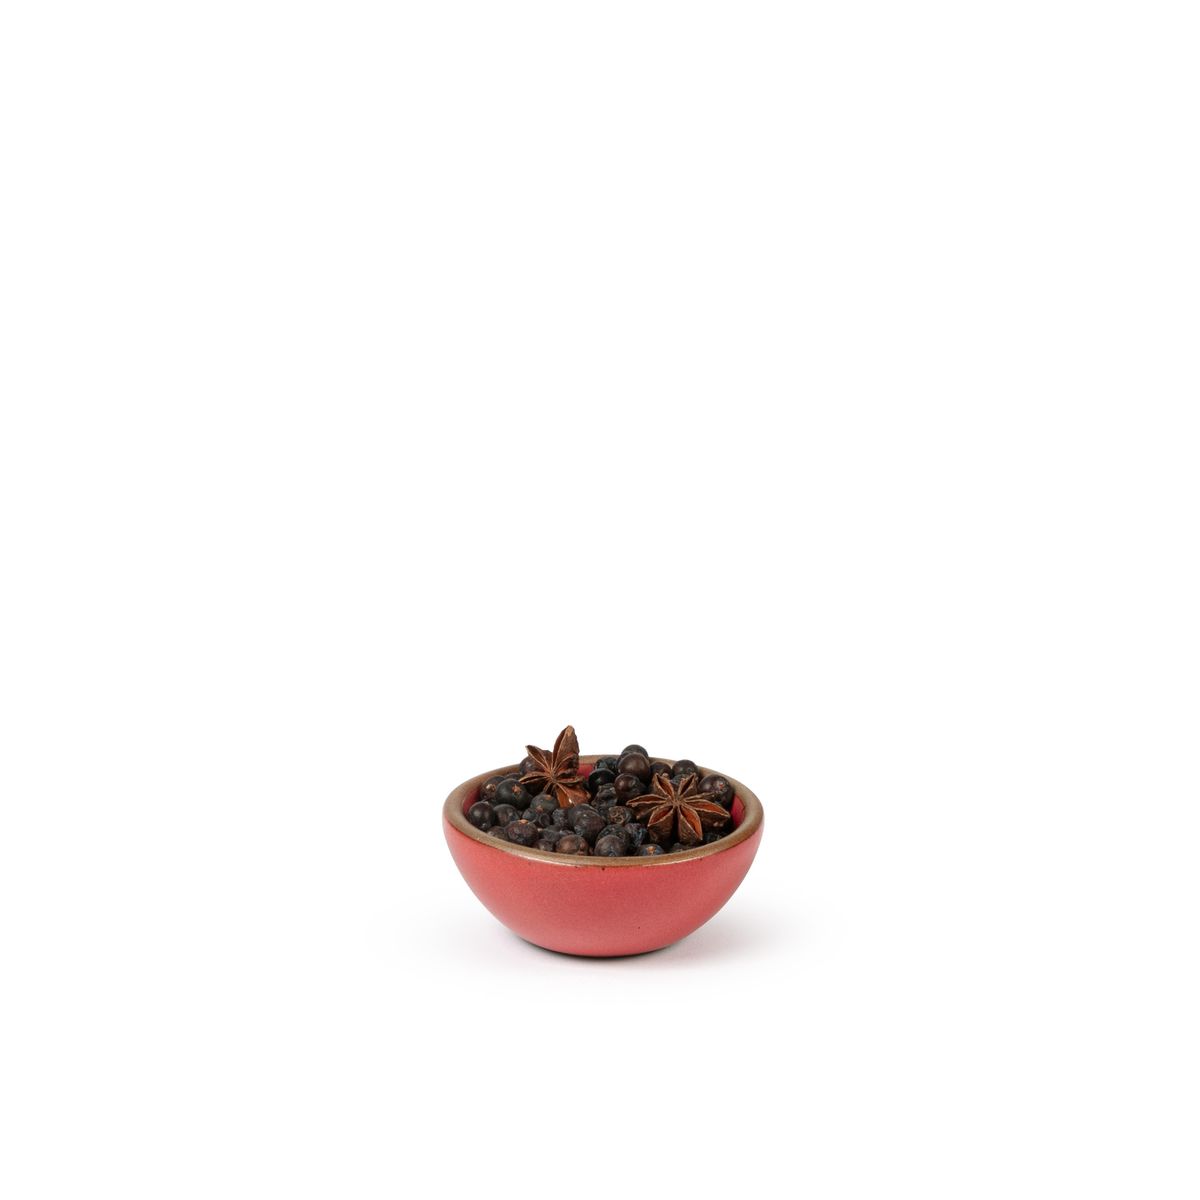 A tiny rounded ceramic bowl in a bold red color featuring iron speckles and an unglazed rim, filled with dried seasoning